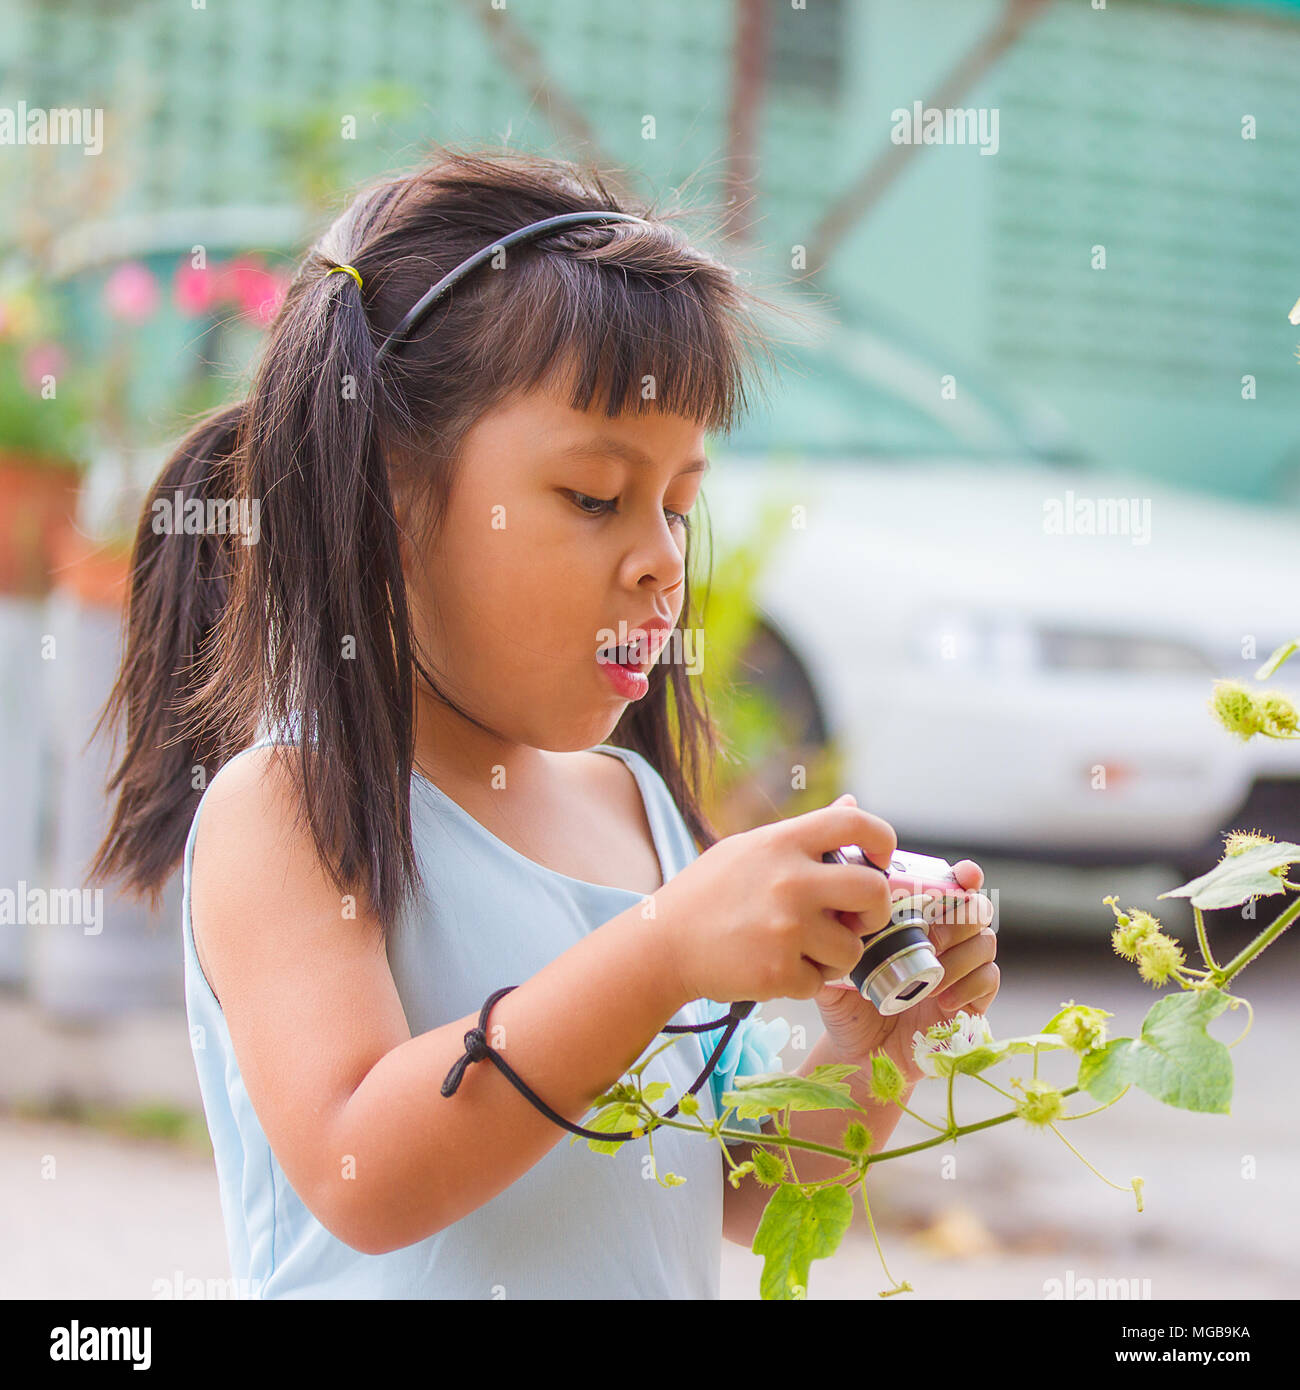 little asia girl taking photo and mouth open Stock Photo